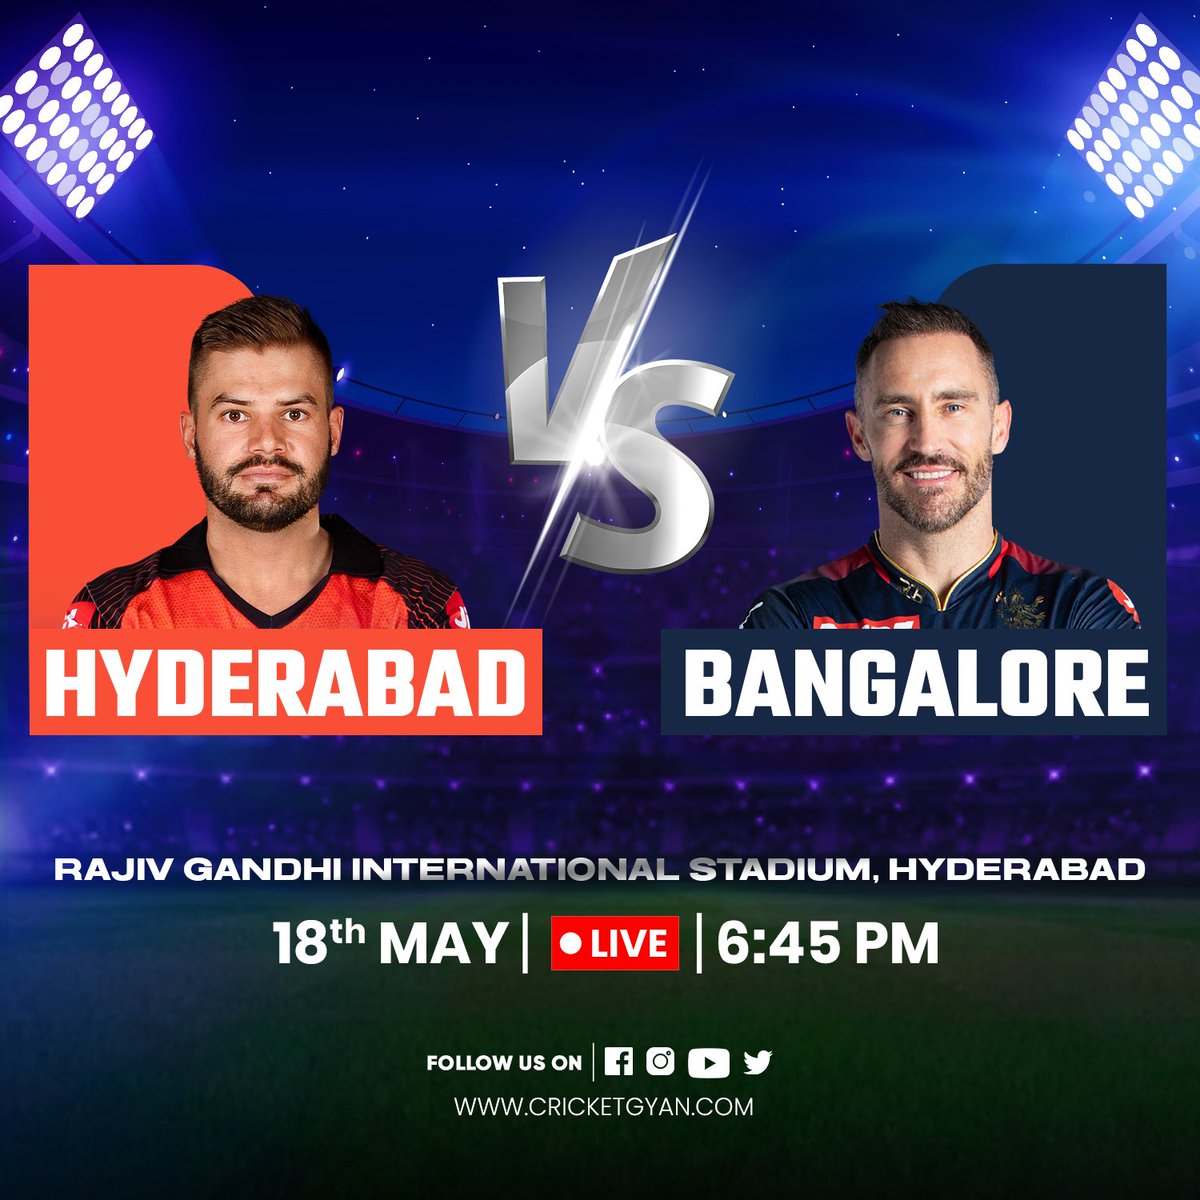 Its Hyderabad vs Banglore tonight. Who will claim victory in this nail-biting battle? Predict your winner in the comment box Who are you supporting, Hyderabad or Banglore? #rcb #SRHvsRCB #banglore #tataipl2023 #t20 #sunriseshyderabad #livingston #cricketgyan #cricket